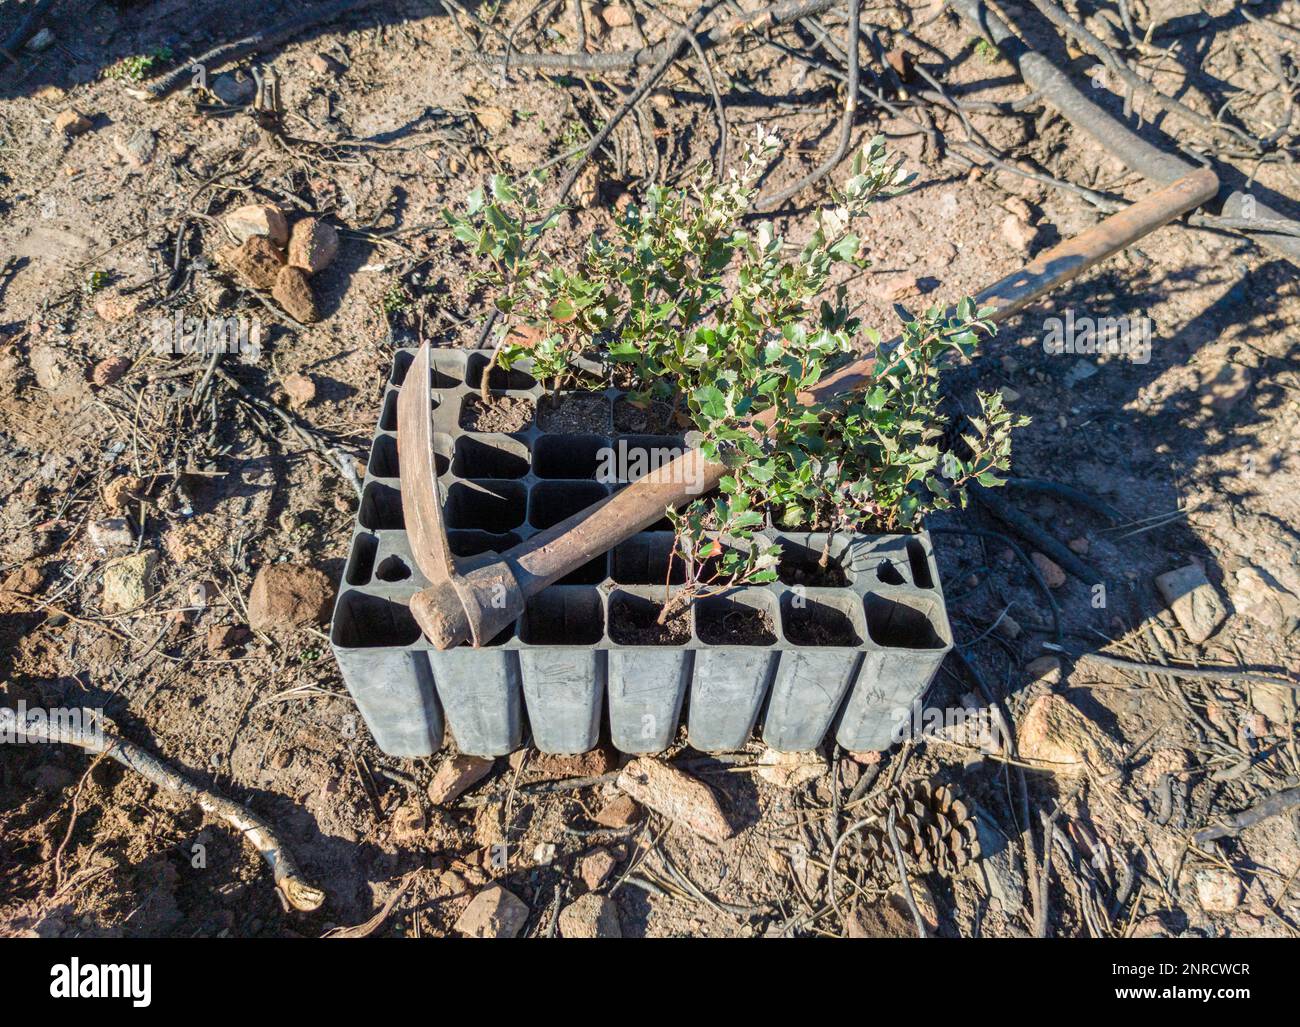 Hoe over sapling seedling tray. Restocking of former forests destroyed by a wildfire Stock Photo